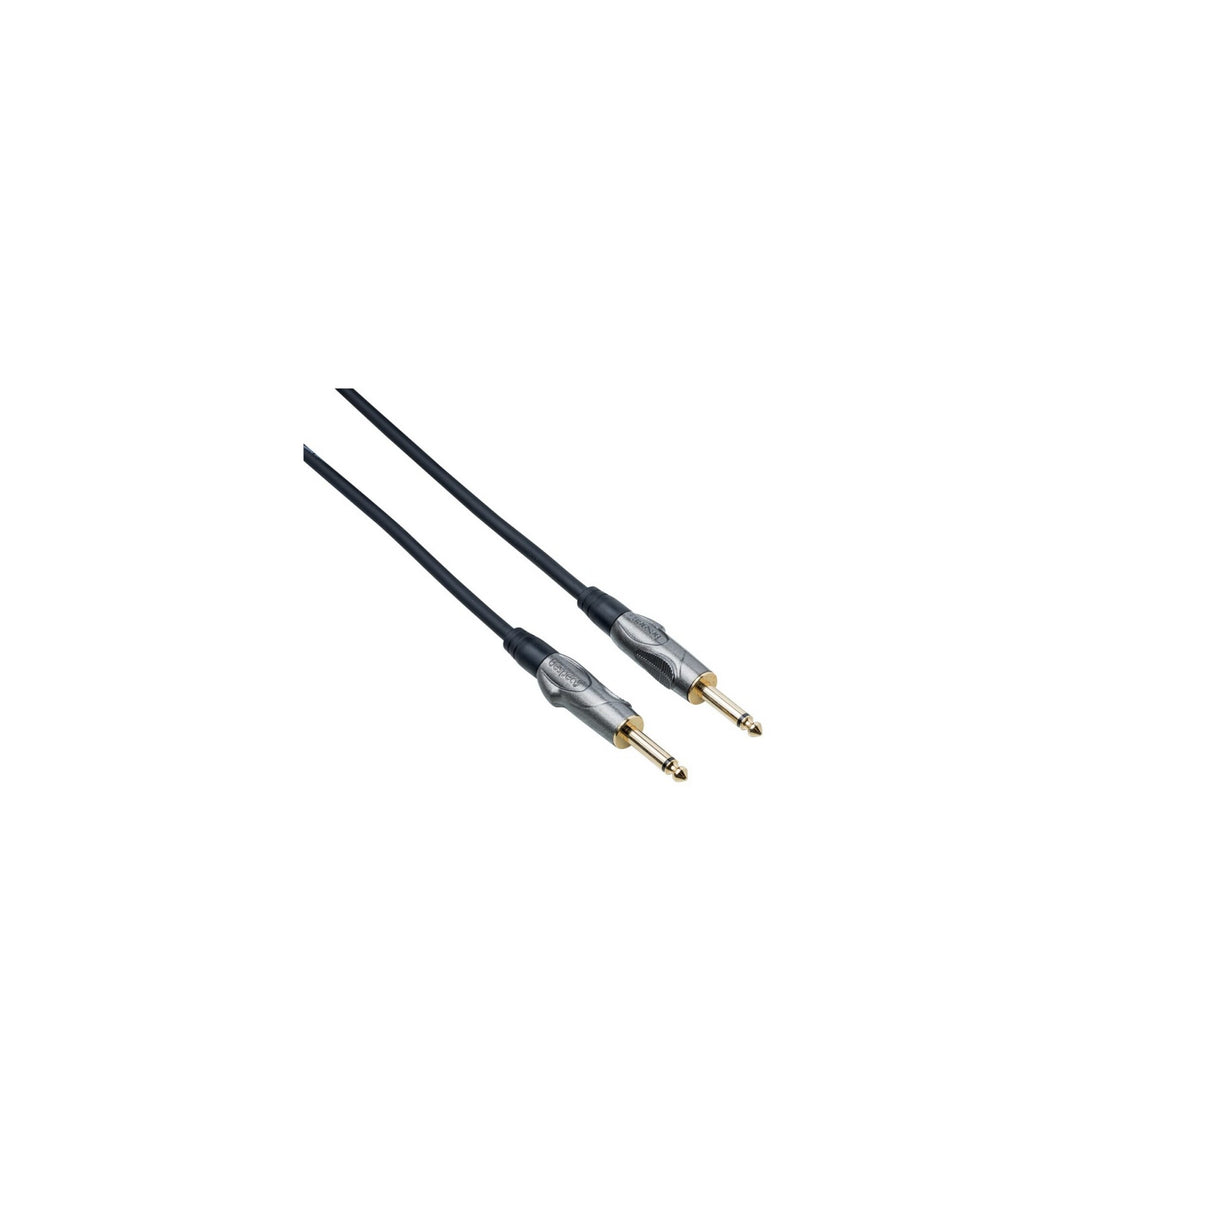 Bespeco TT900 Titanium Series Straight Angle 1/4 Inch to 1/4 Inch Guitar Cable, 30 Foot